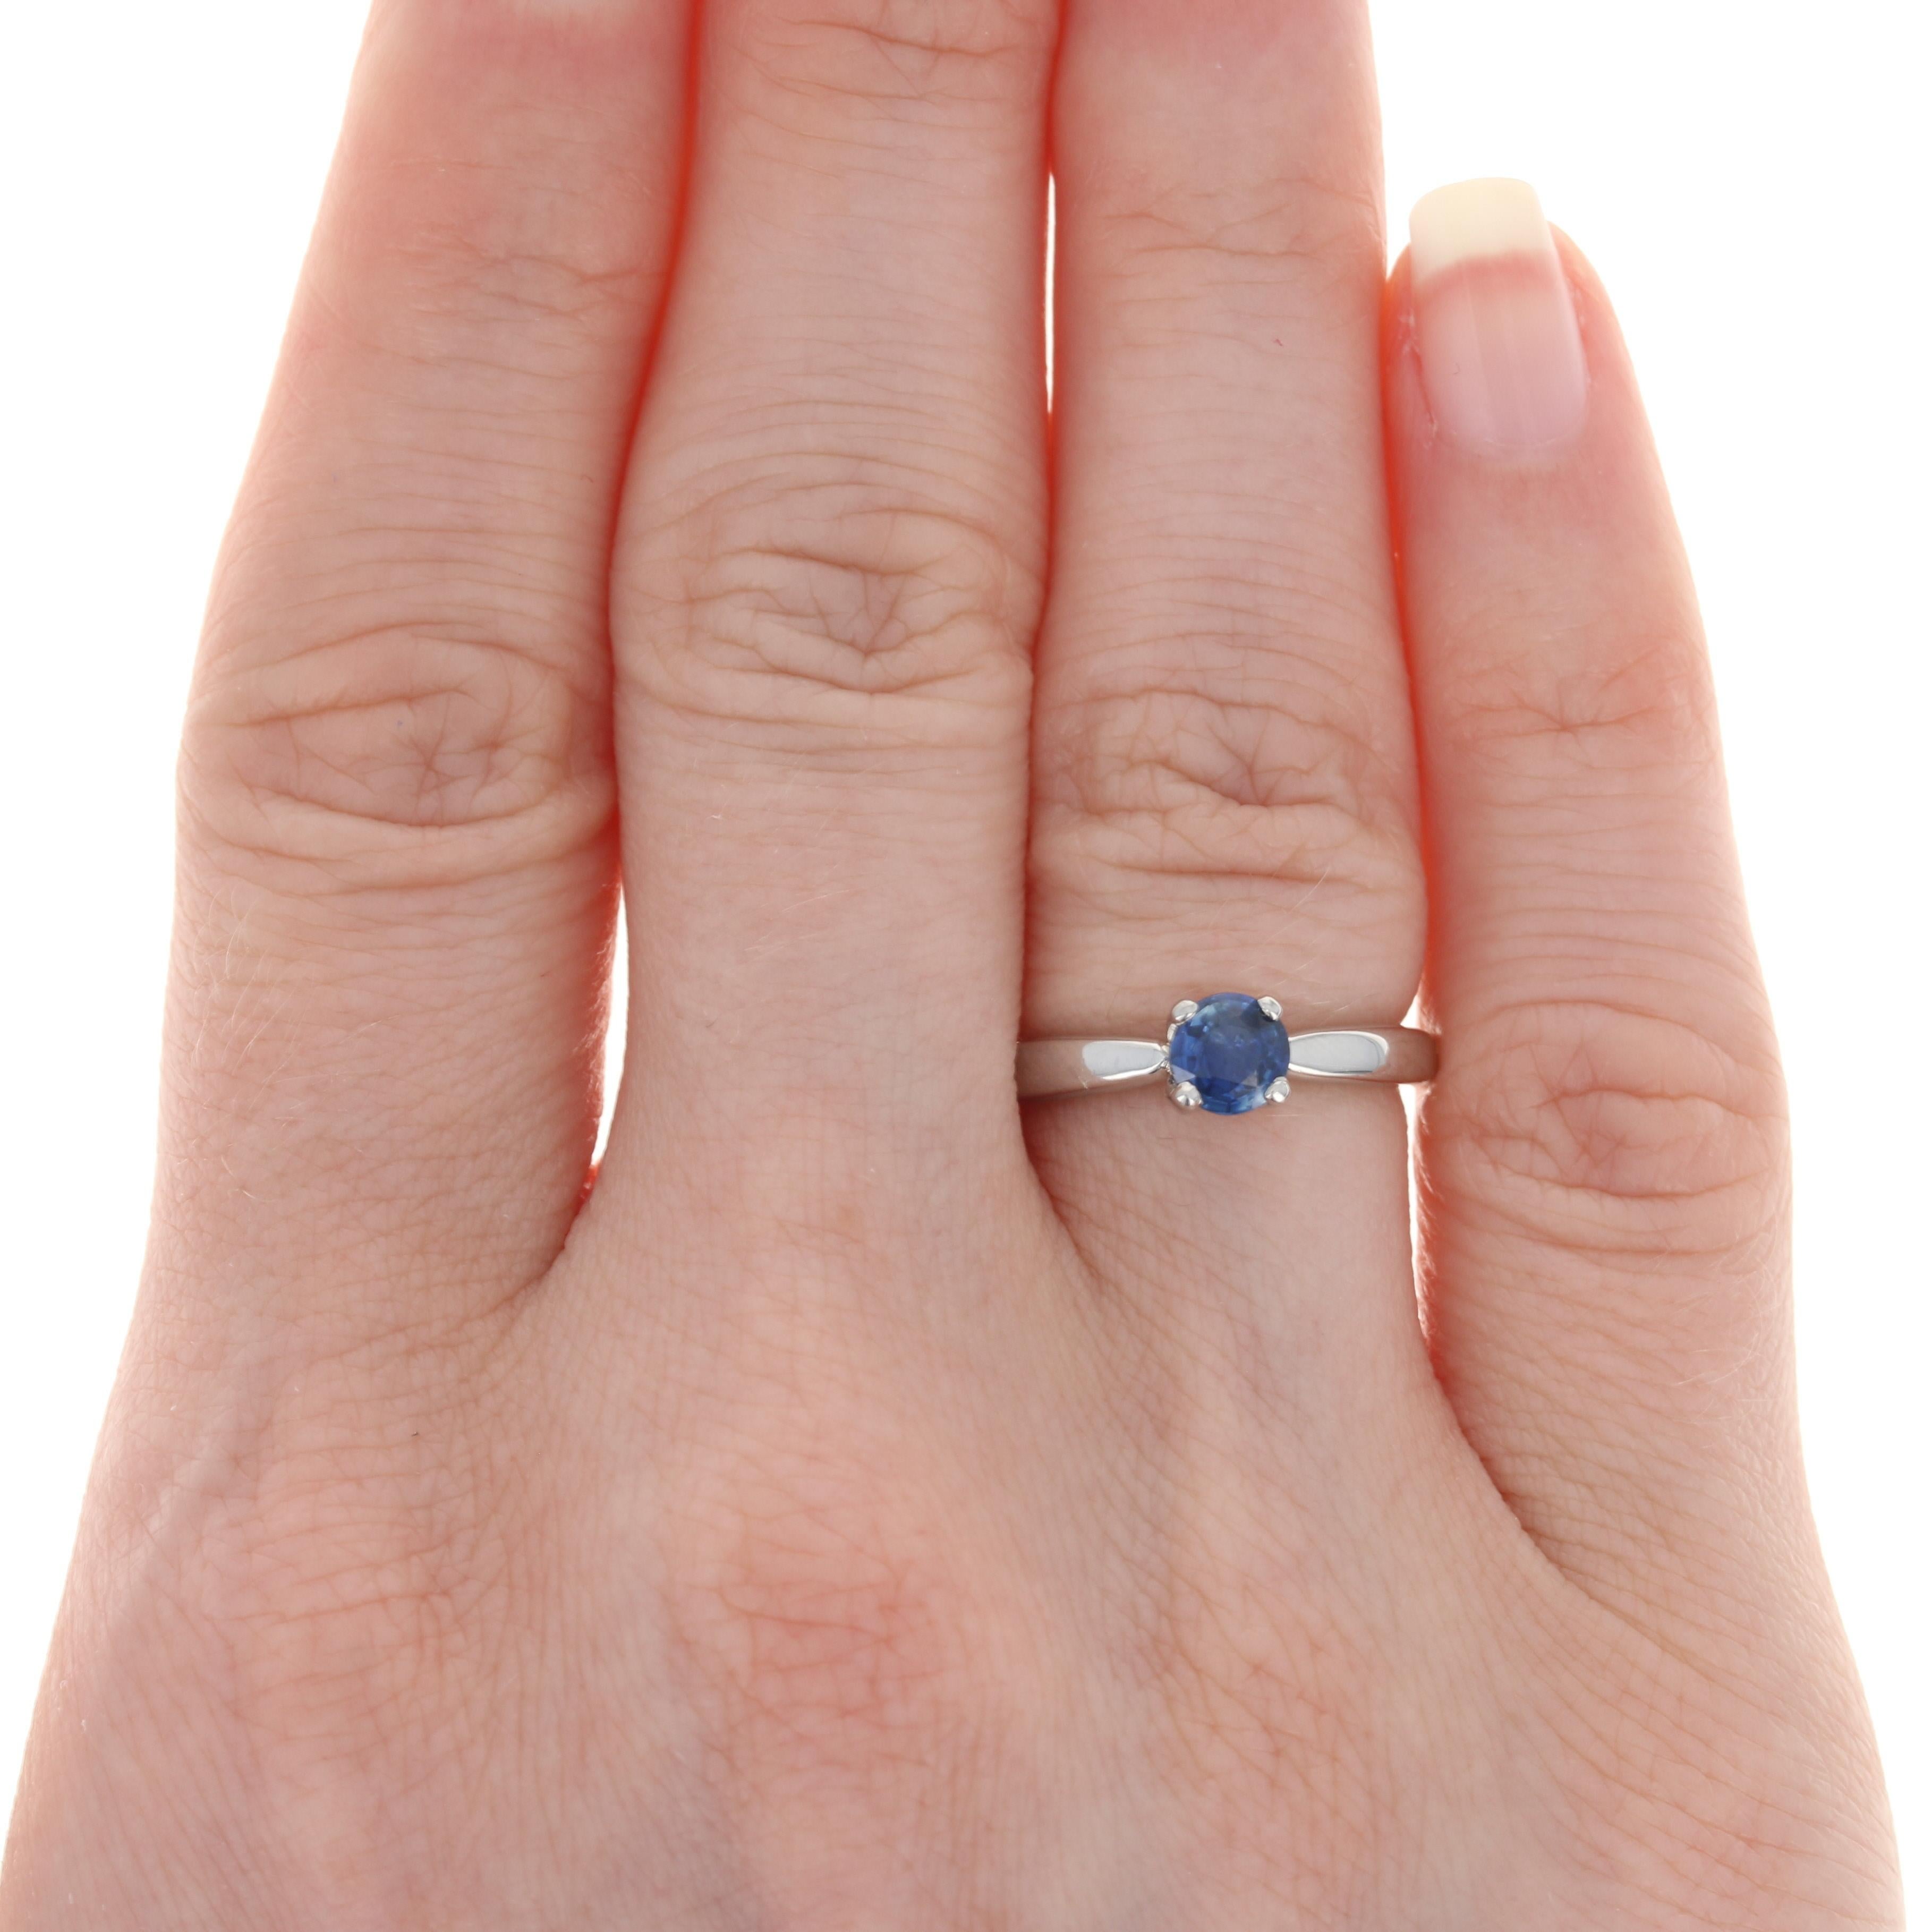 As uniquely beautiful as your romance, this radiant NEW engagement ring will be the perfect choice for your bride-to-be! This 950 platinum ring is fashioned in a classic Tiffany-style design graced by a sumptuous blue sapphire solitaire that will